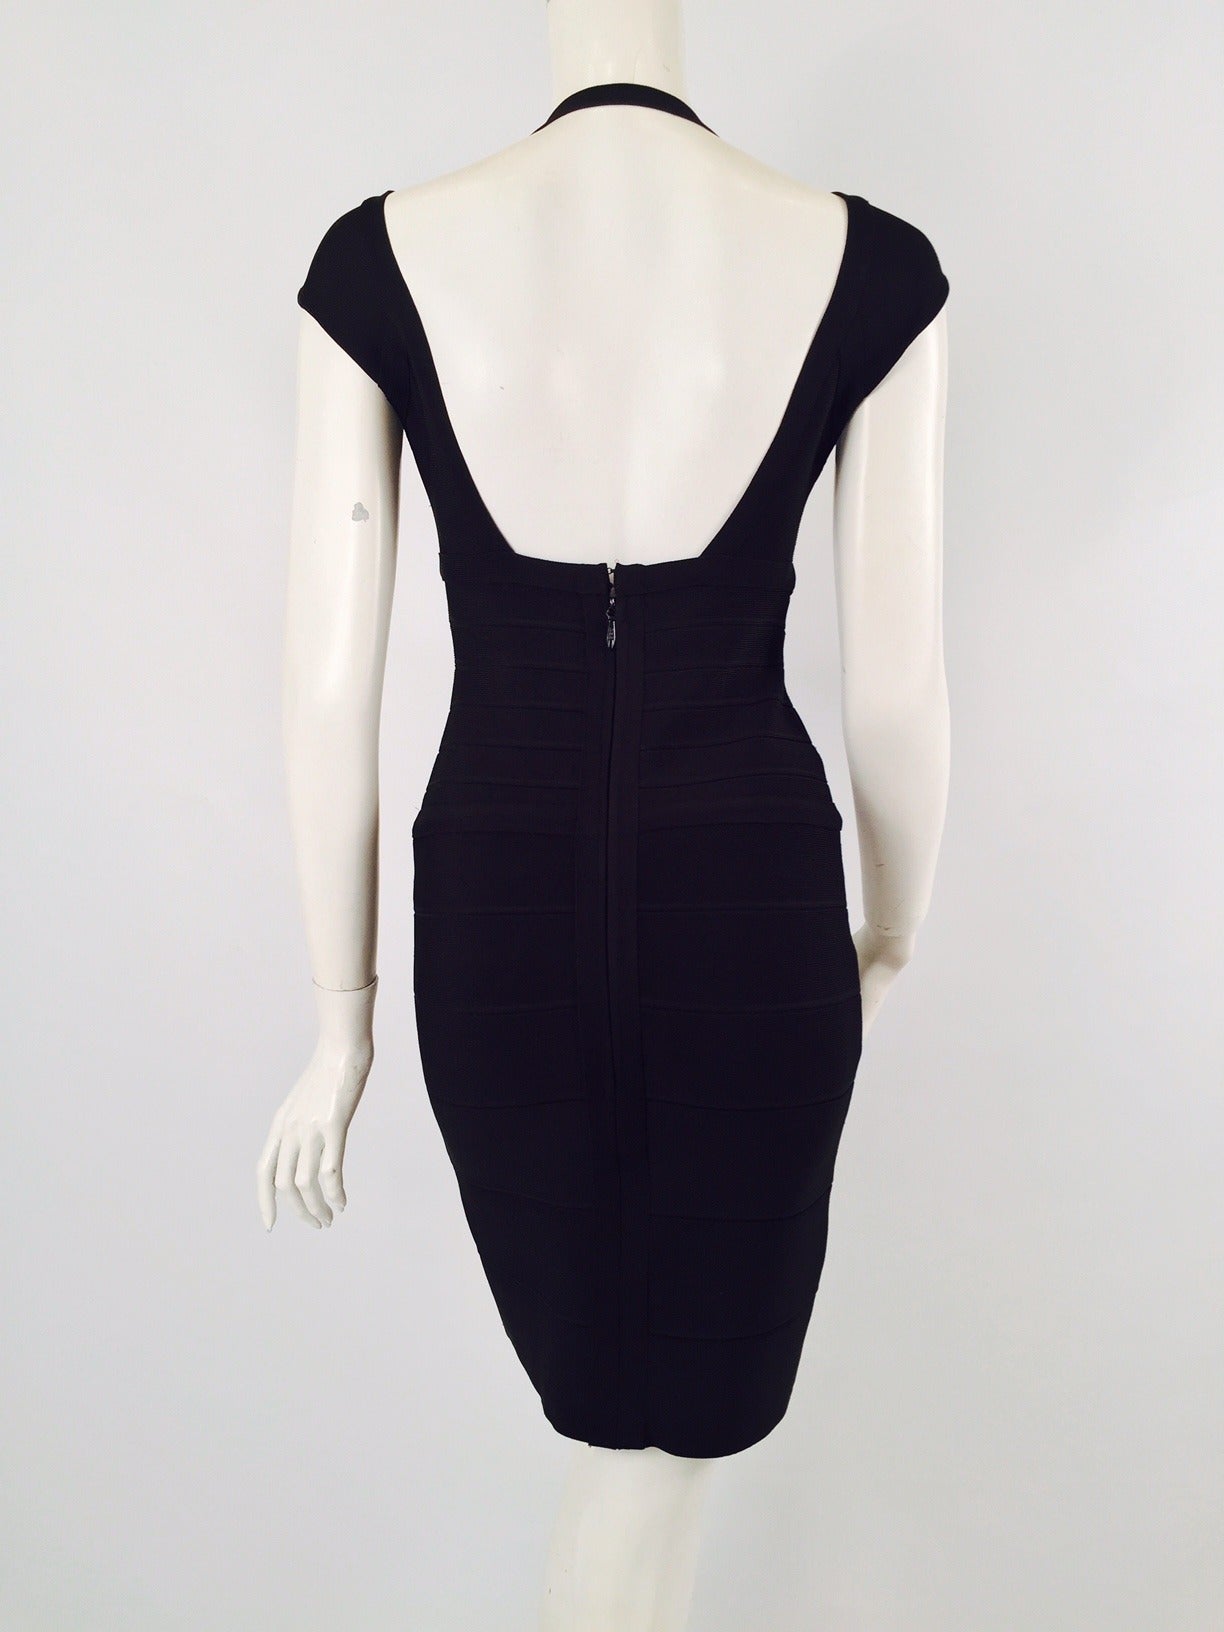 Herve Leger Iconic Black Badage Dress In Excellent Condition For Sale In Palm Beach, FL